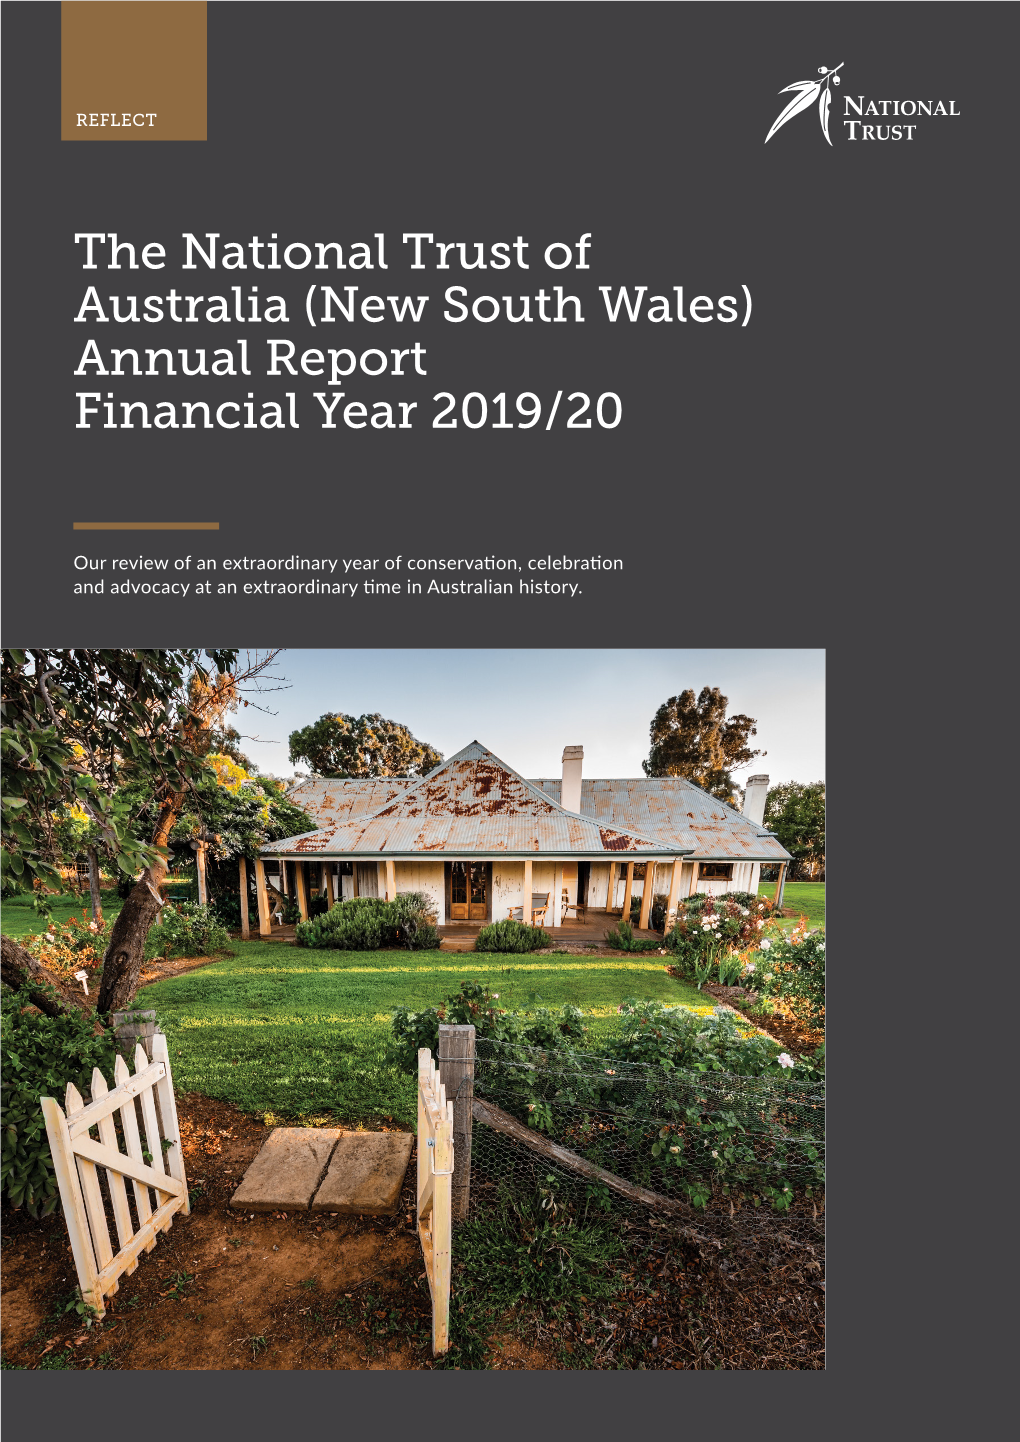 The National Trust of Australia (New South Wales) Annual Report Financial Year 2019/20